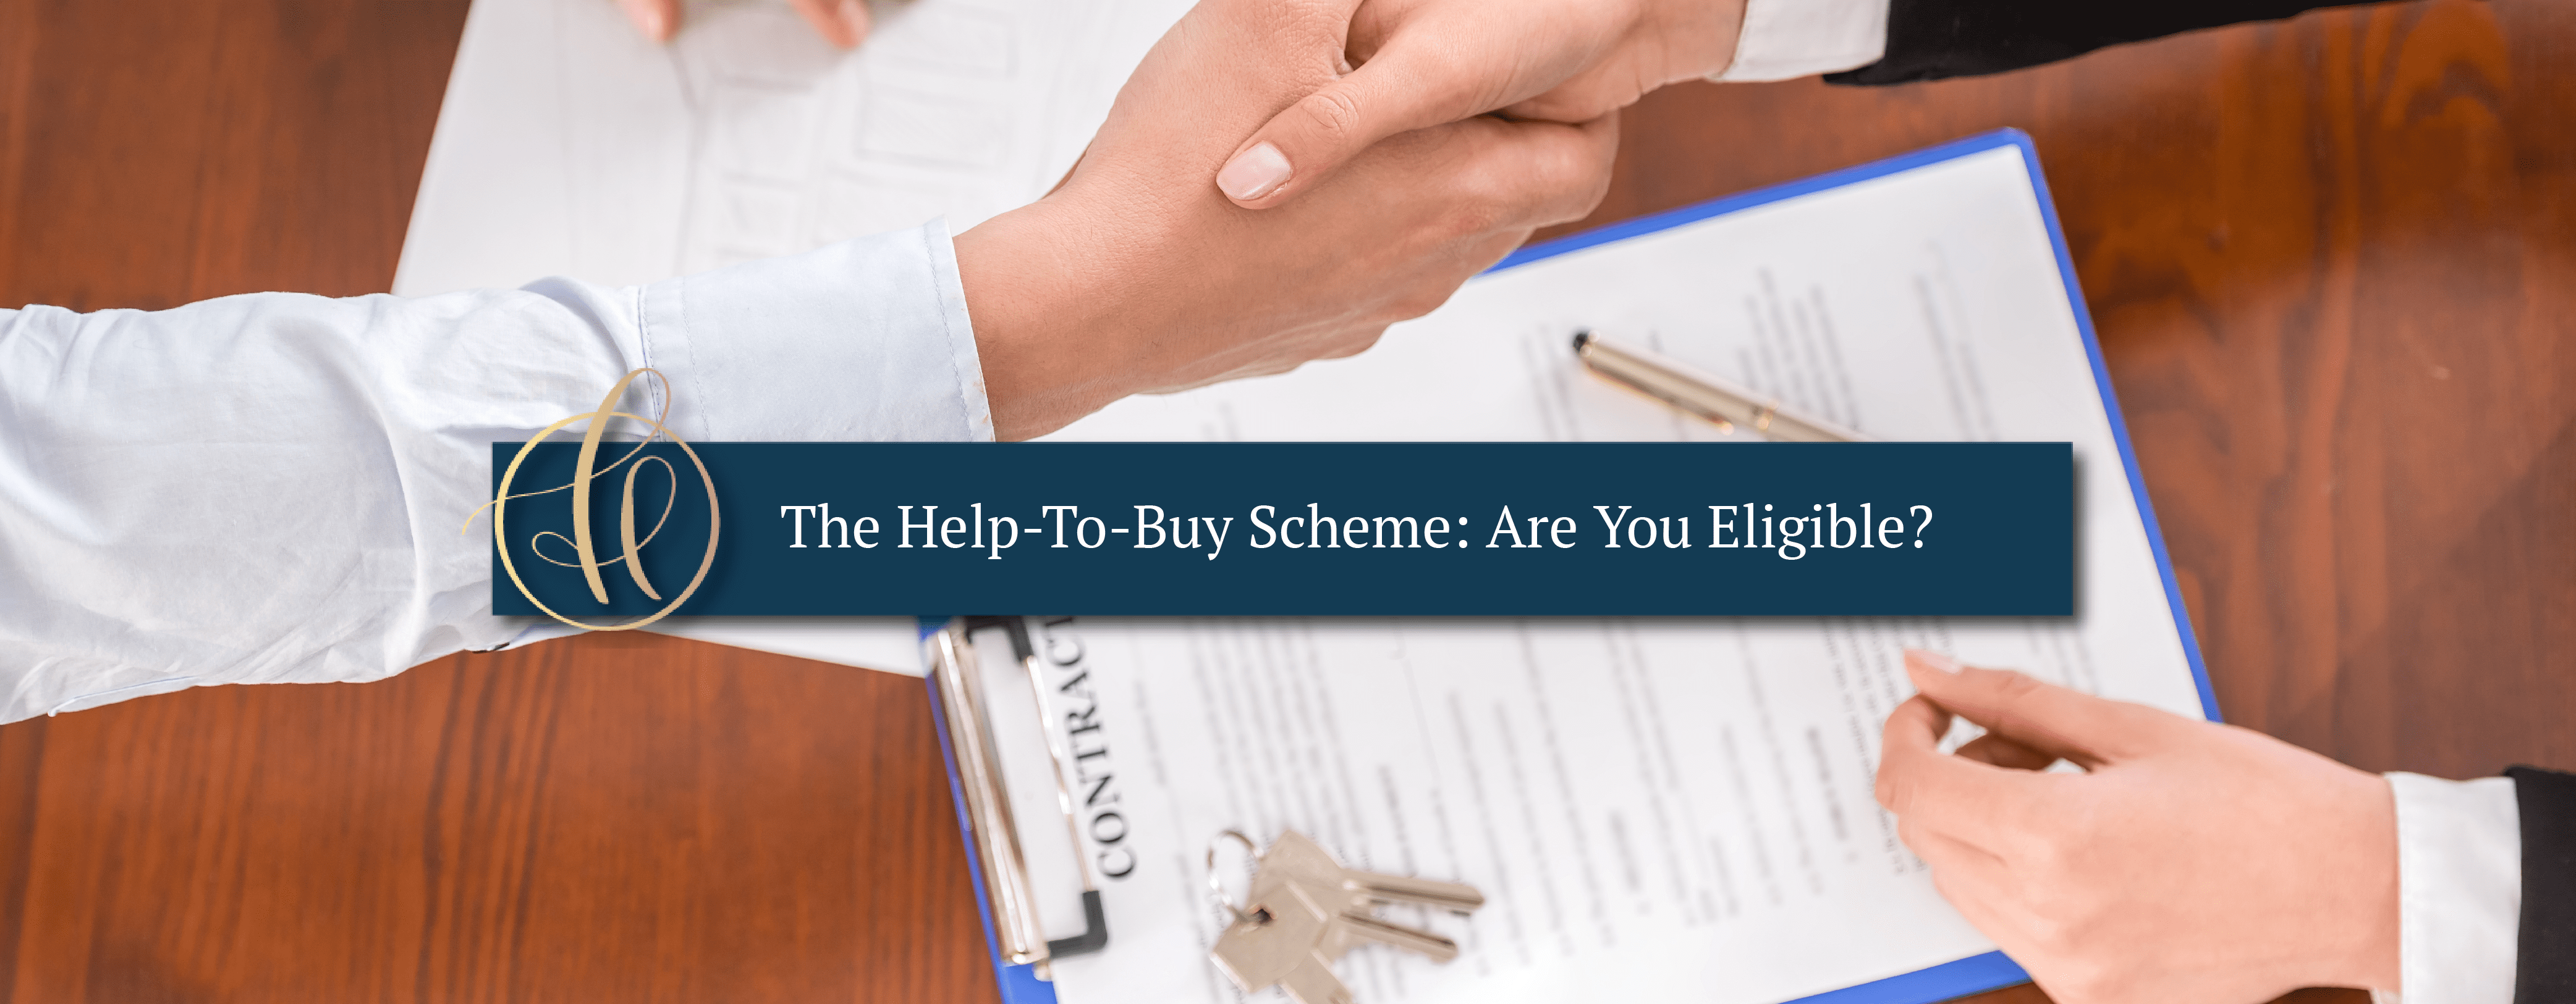 Are You Eligible for the Help-to-Buy Scheme?